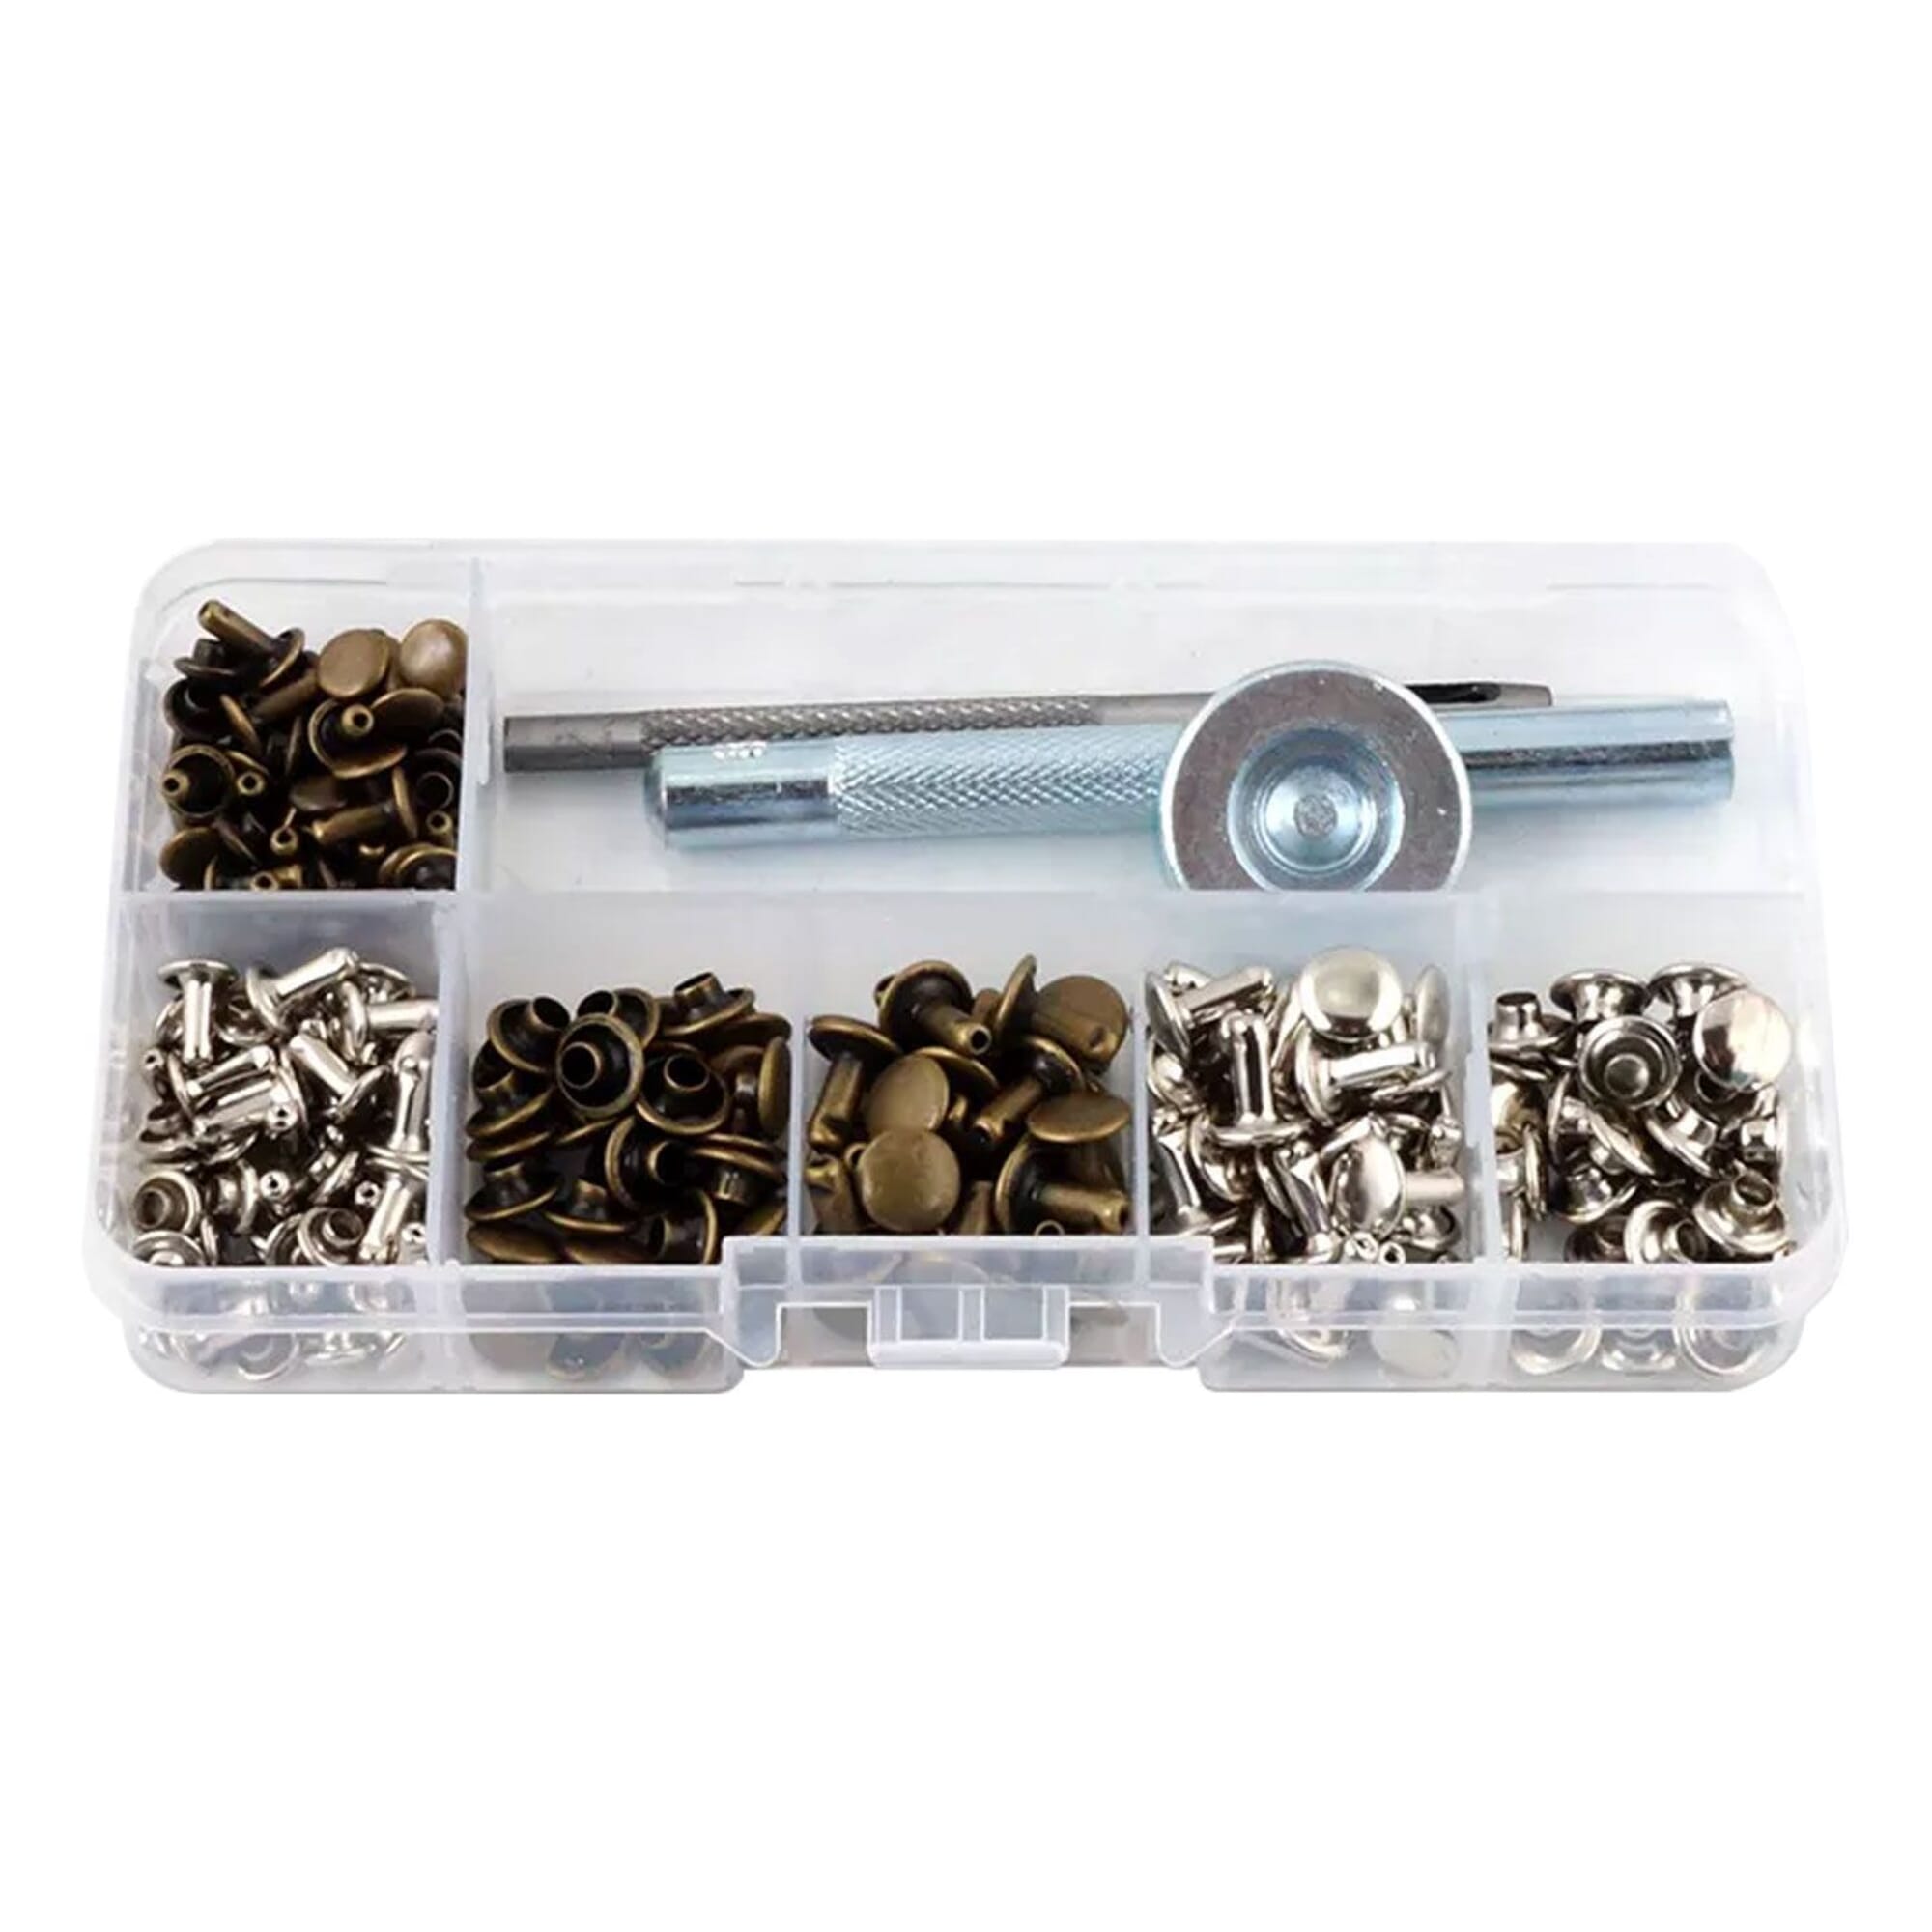 Generic Brand 120pcs Leathercraft Antique Silver Leather Rivets Setter Hole Punch Tool Kit, 8mm and 6mm Rivets in A Plastic Box Set for Leatherworking